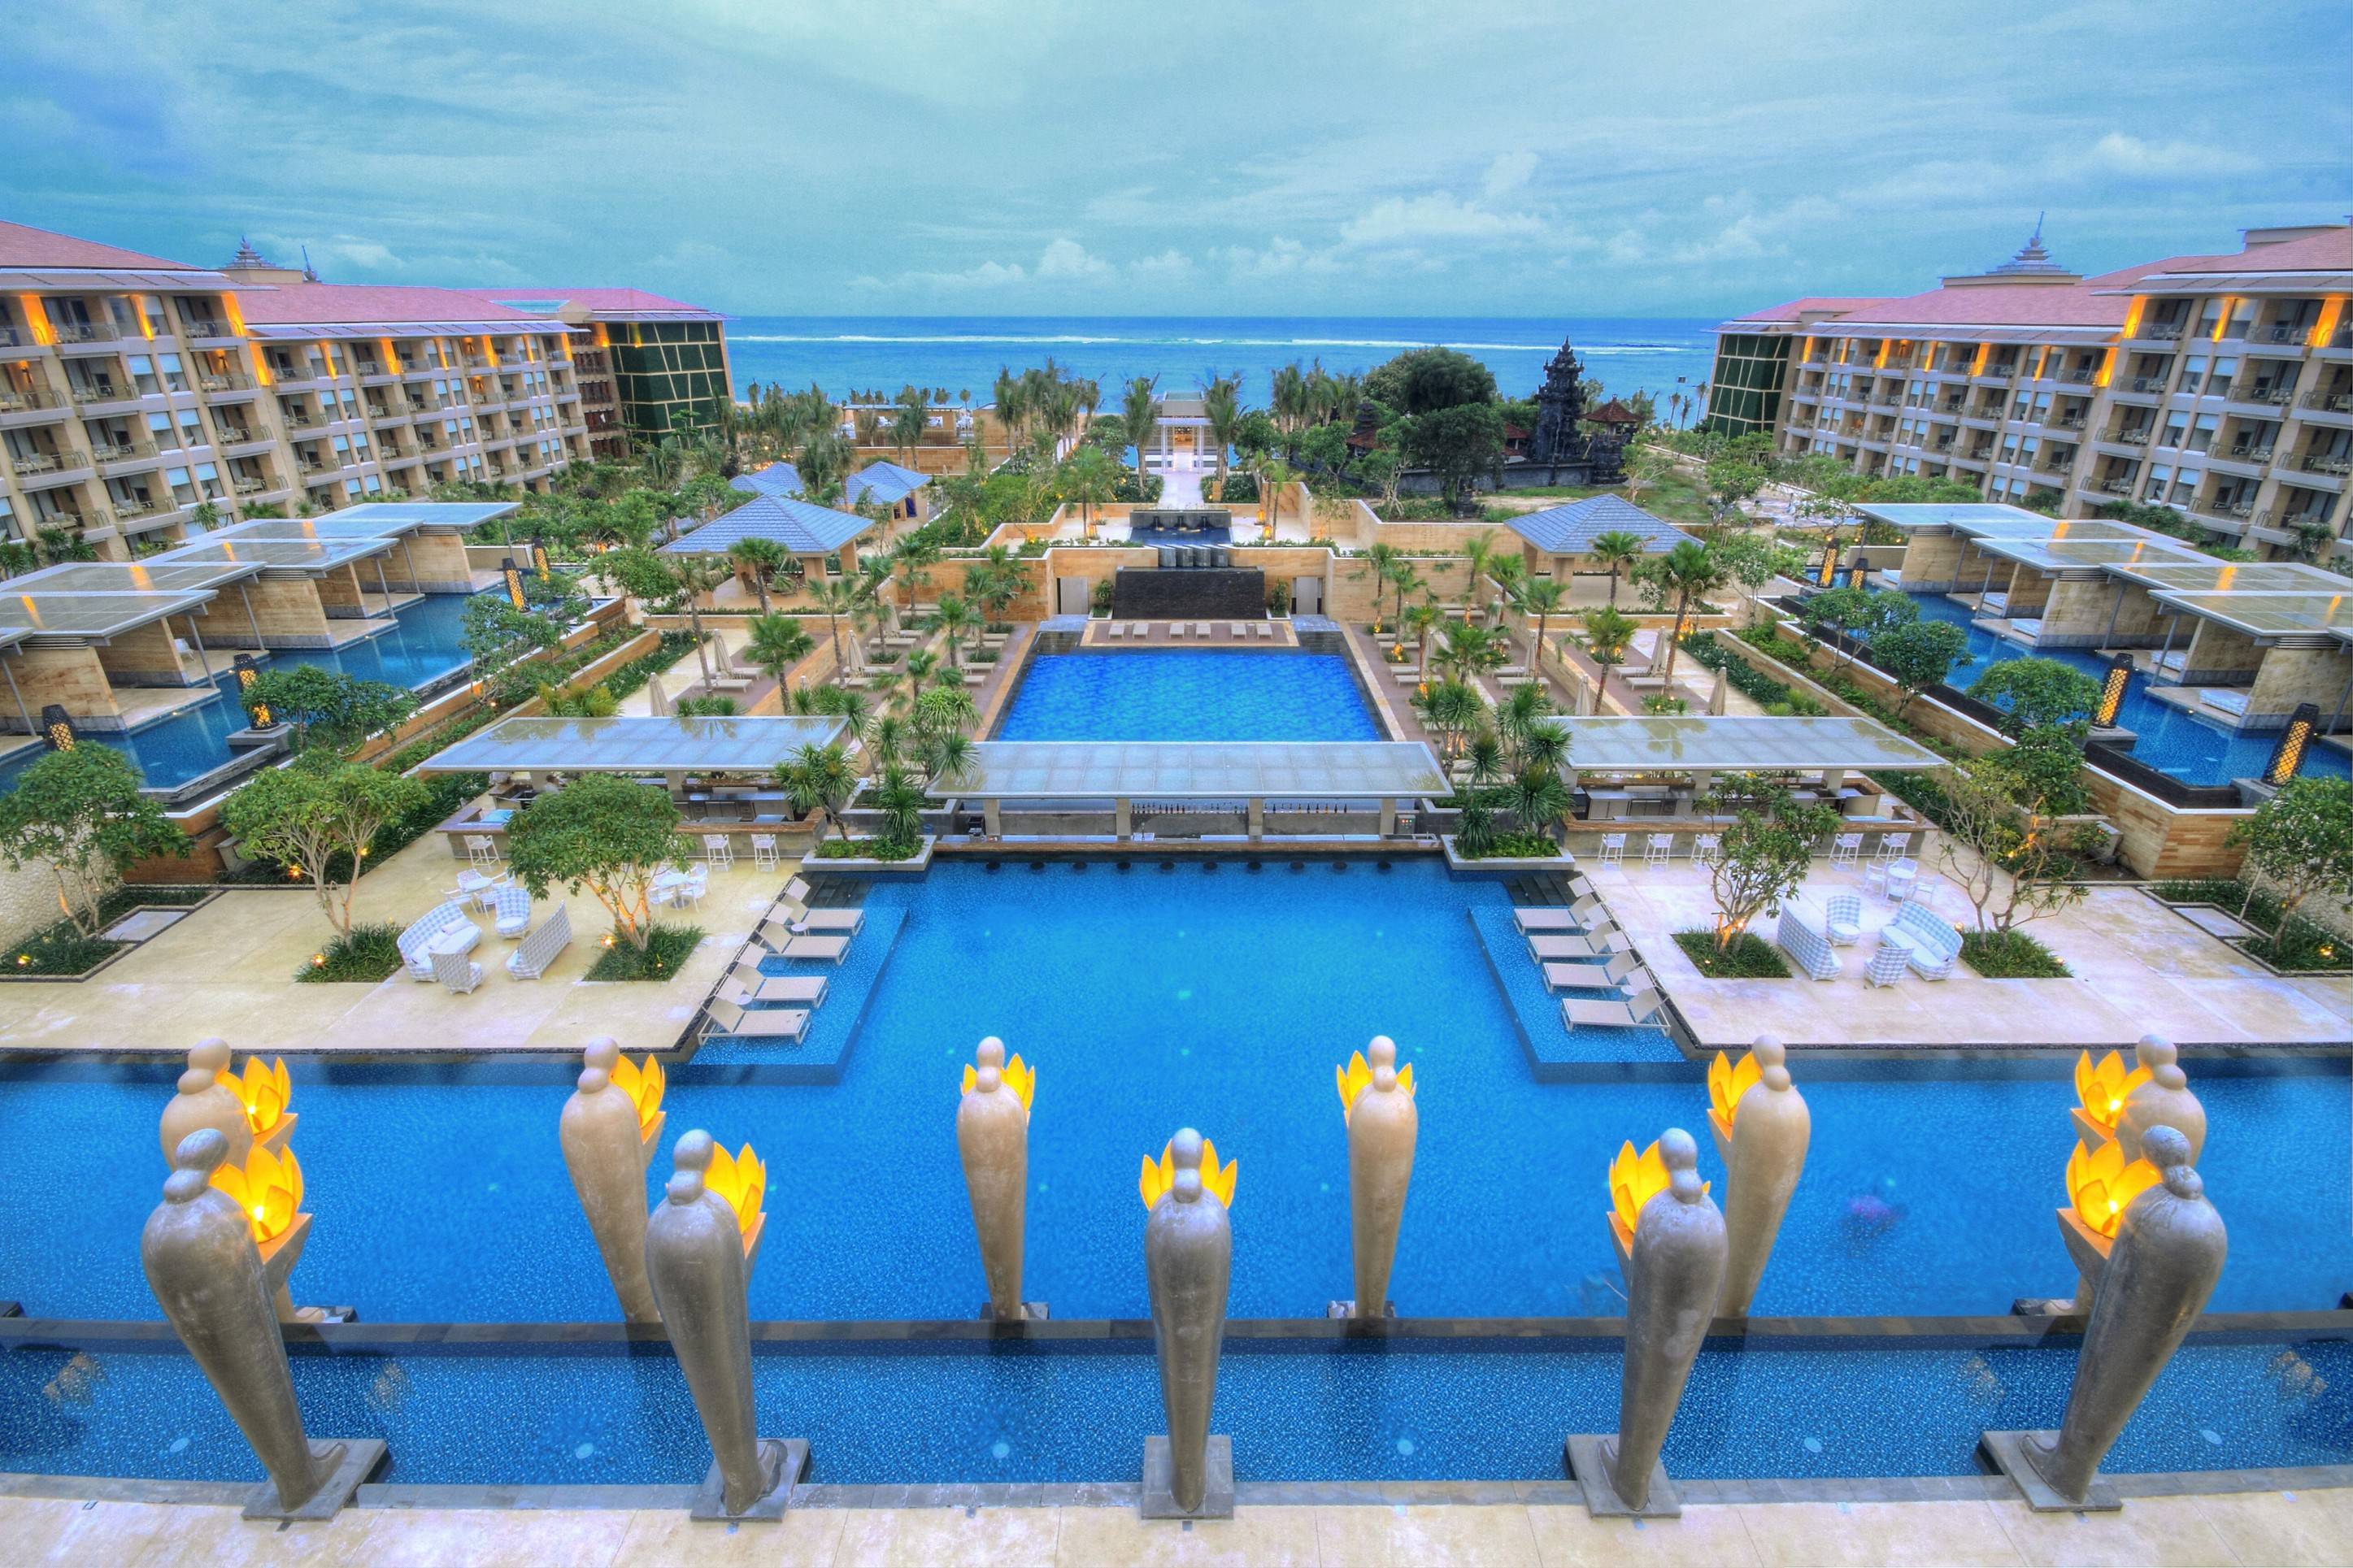 2 FREE nights and F&B credit at one of Bali's premier luxury resorts!